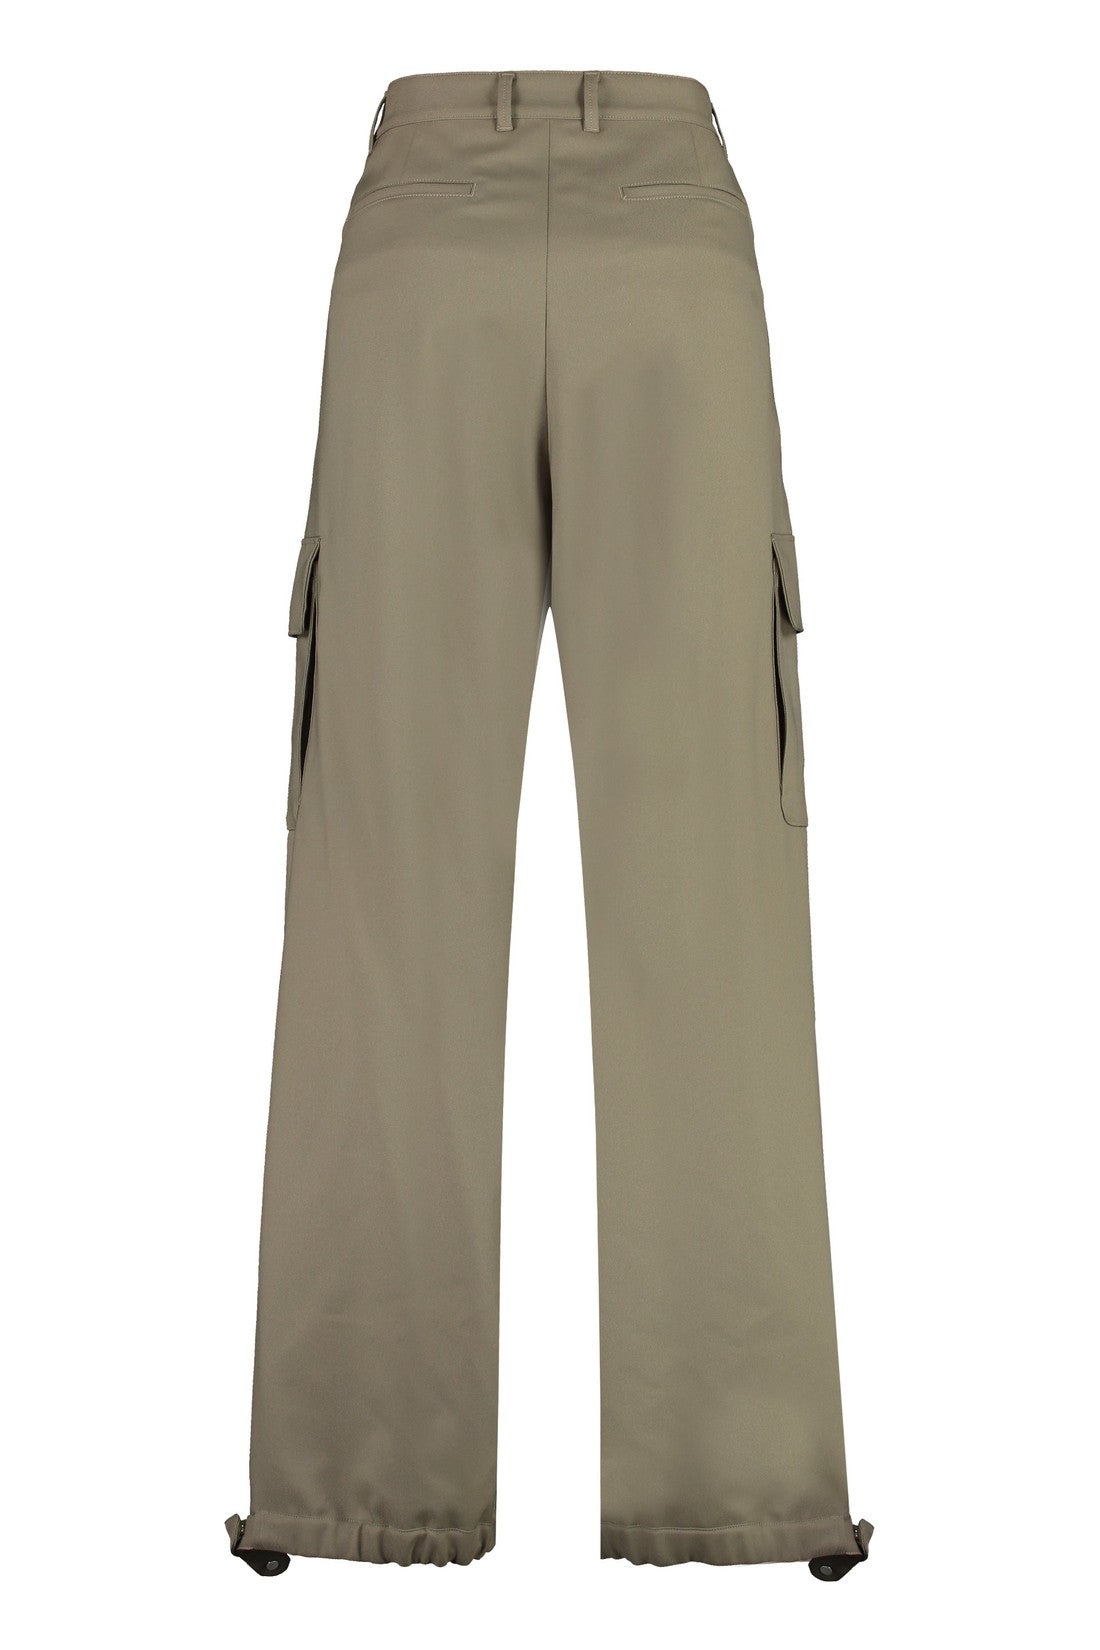 Off-White-OUTLET-SALE-technical fabric cargo pants-ARCHIVIST